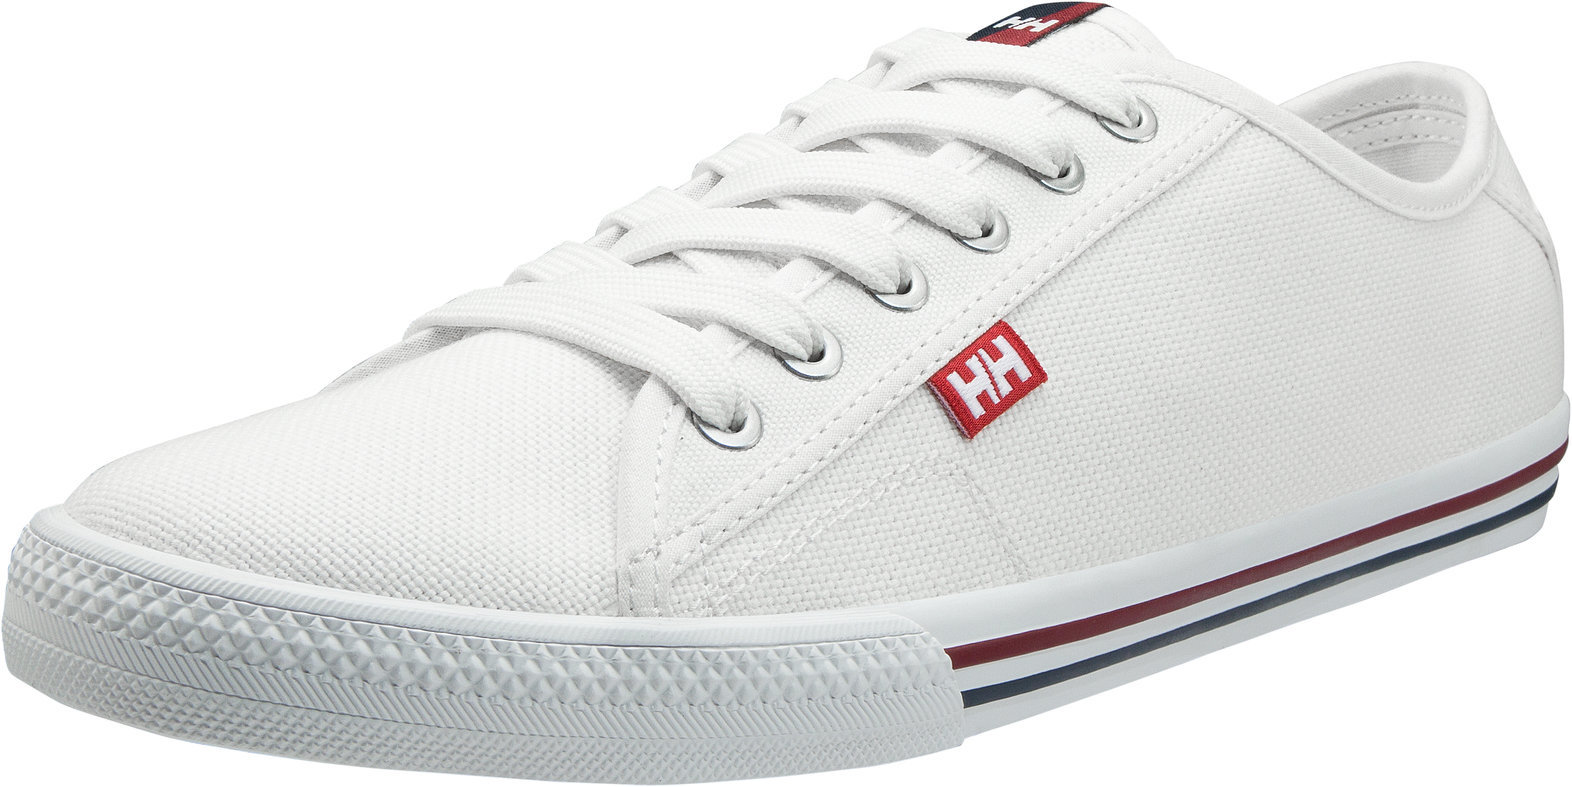 Mens Sailing Shoes Helly Hansen FJORD CANVAS OFF WHITE 44